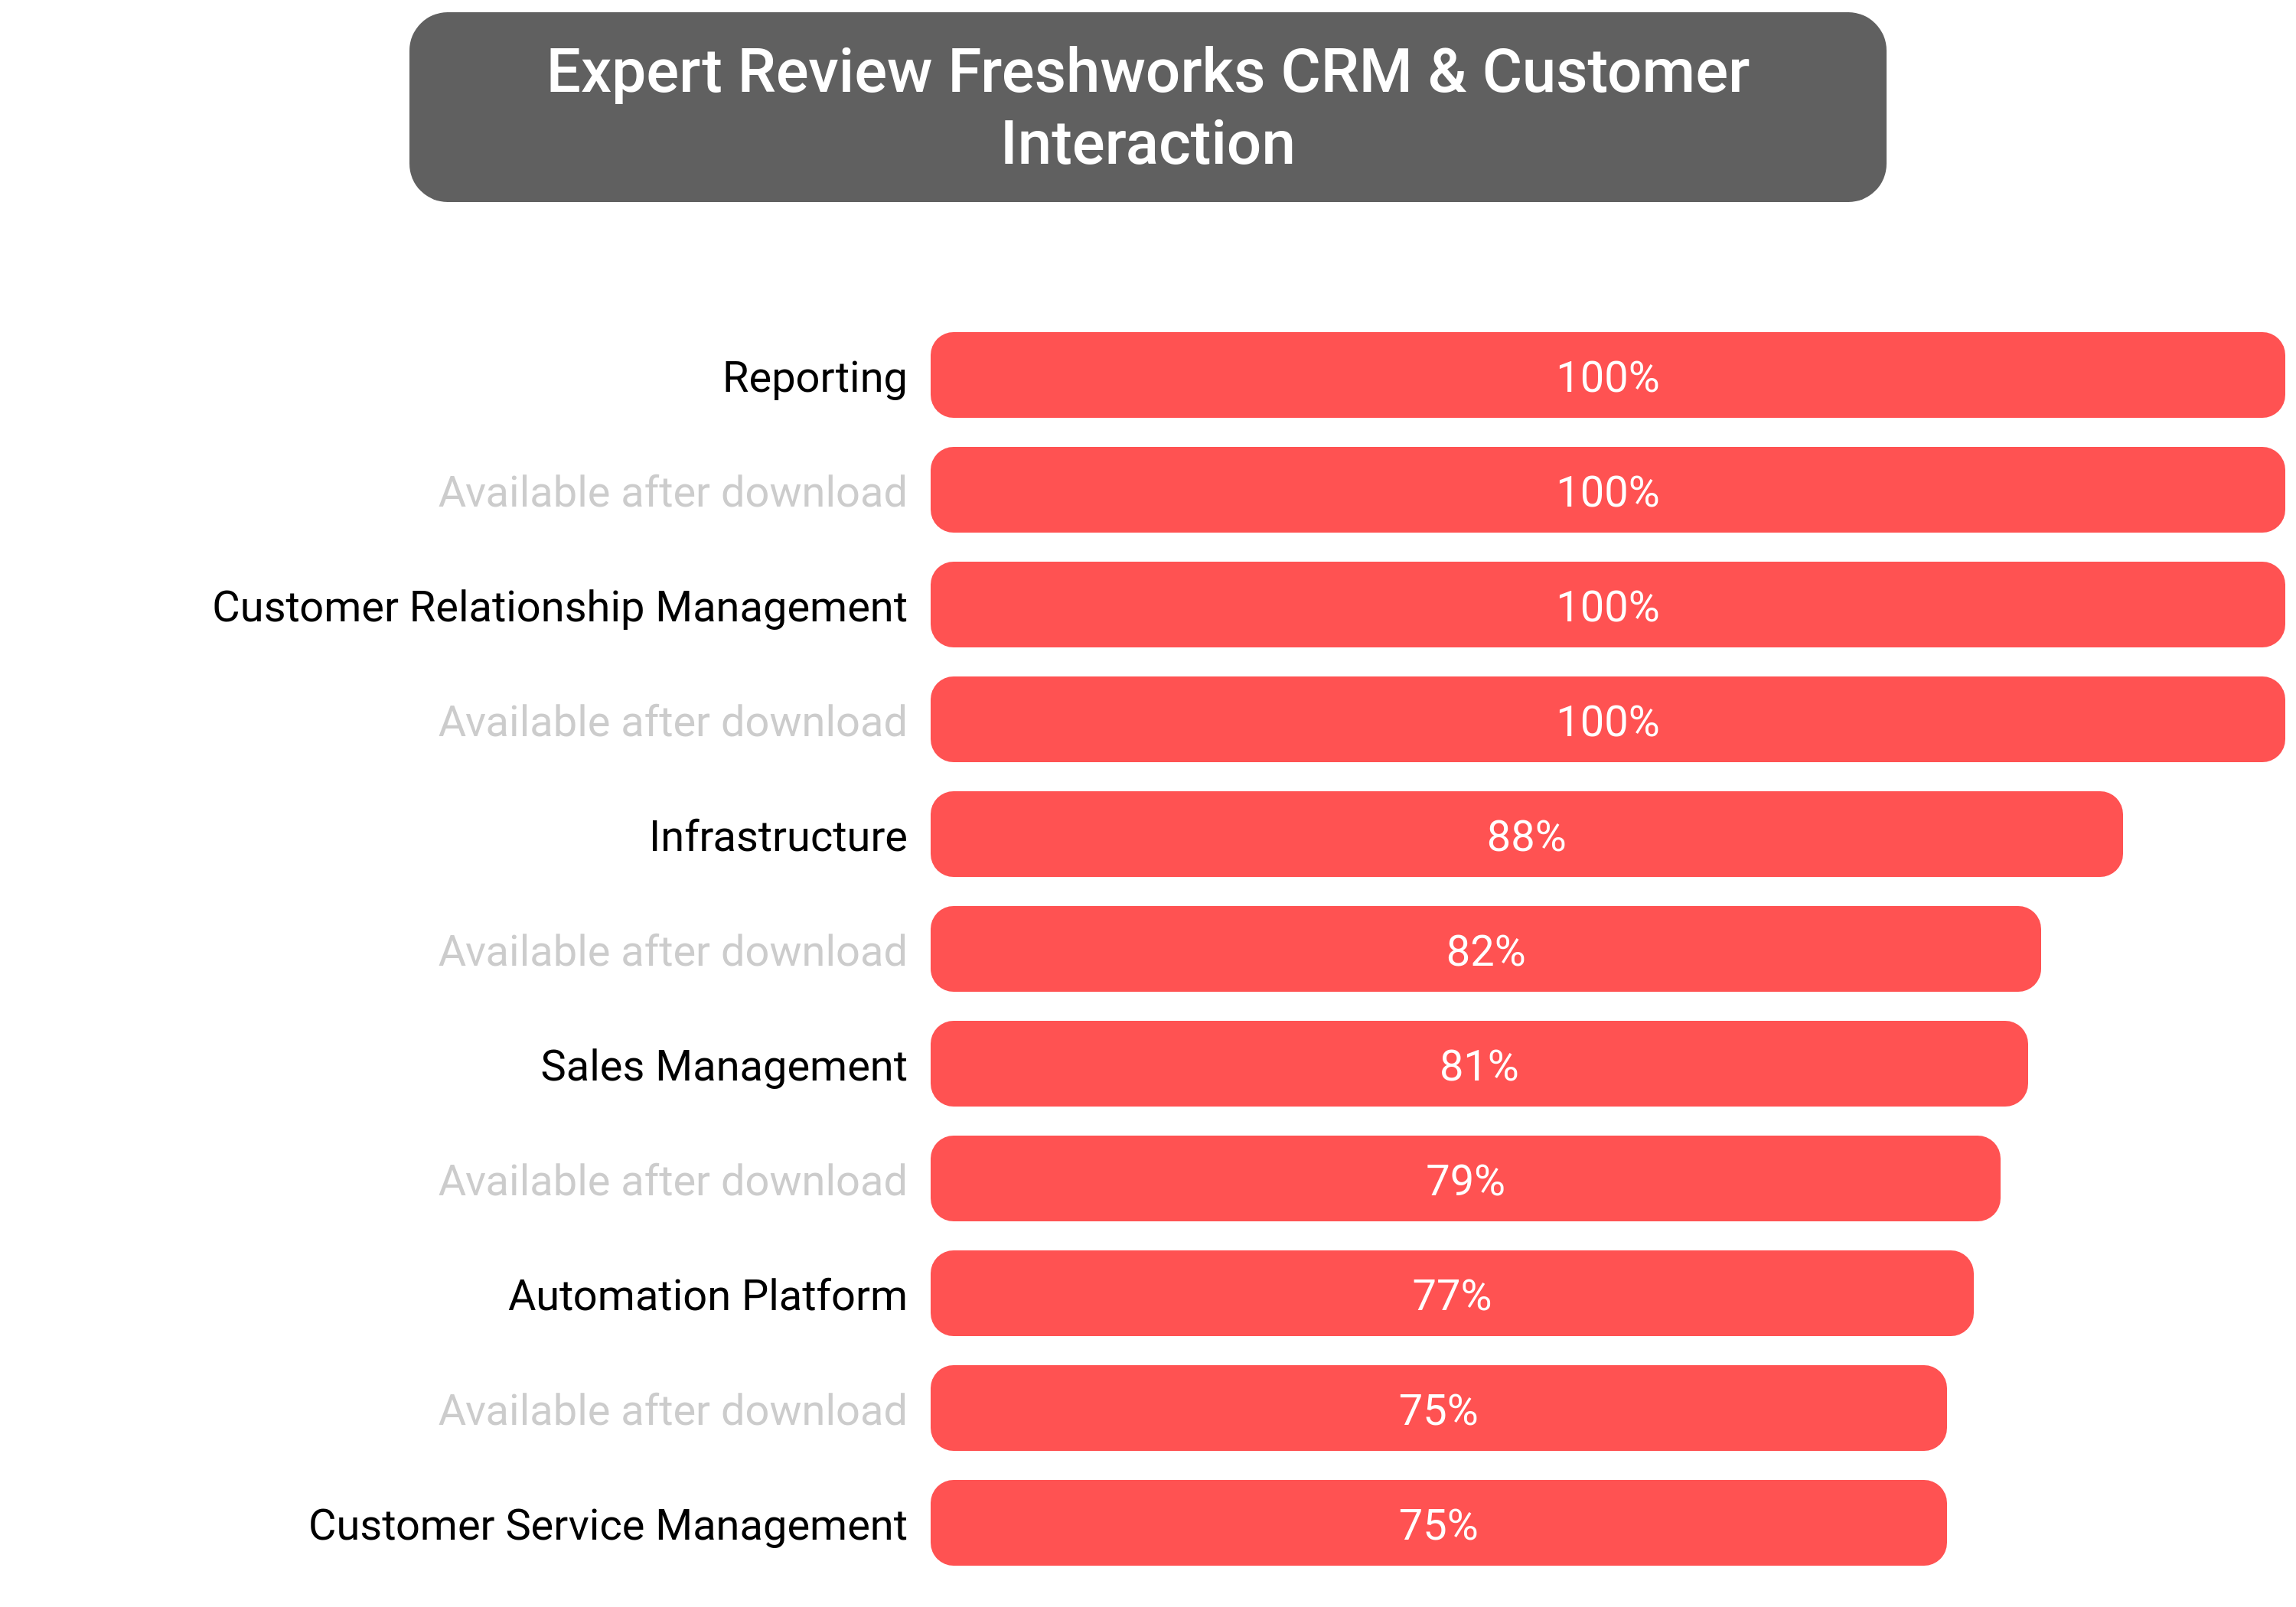 Score of Freshworks CRM software.